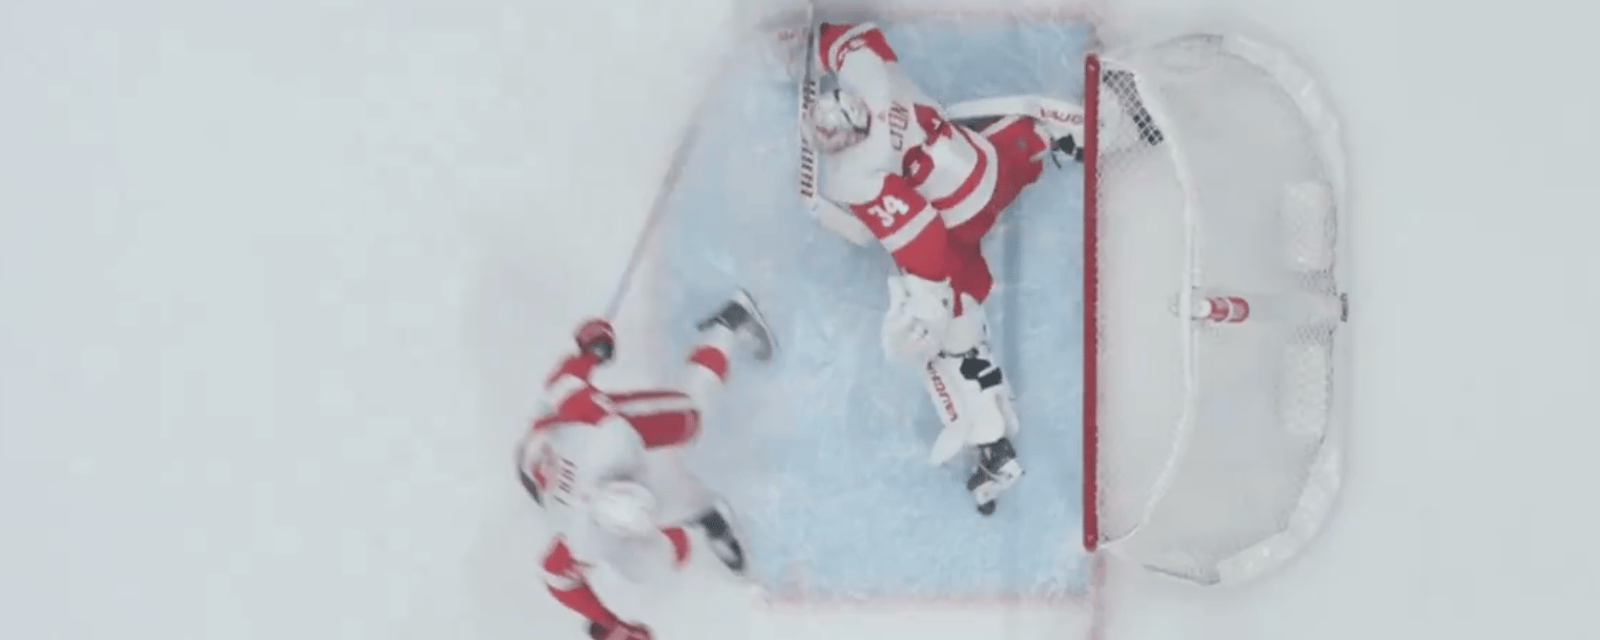 VIDEO: Alex Lyon's skate save one of the best you'll ever see 